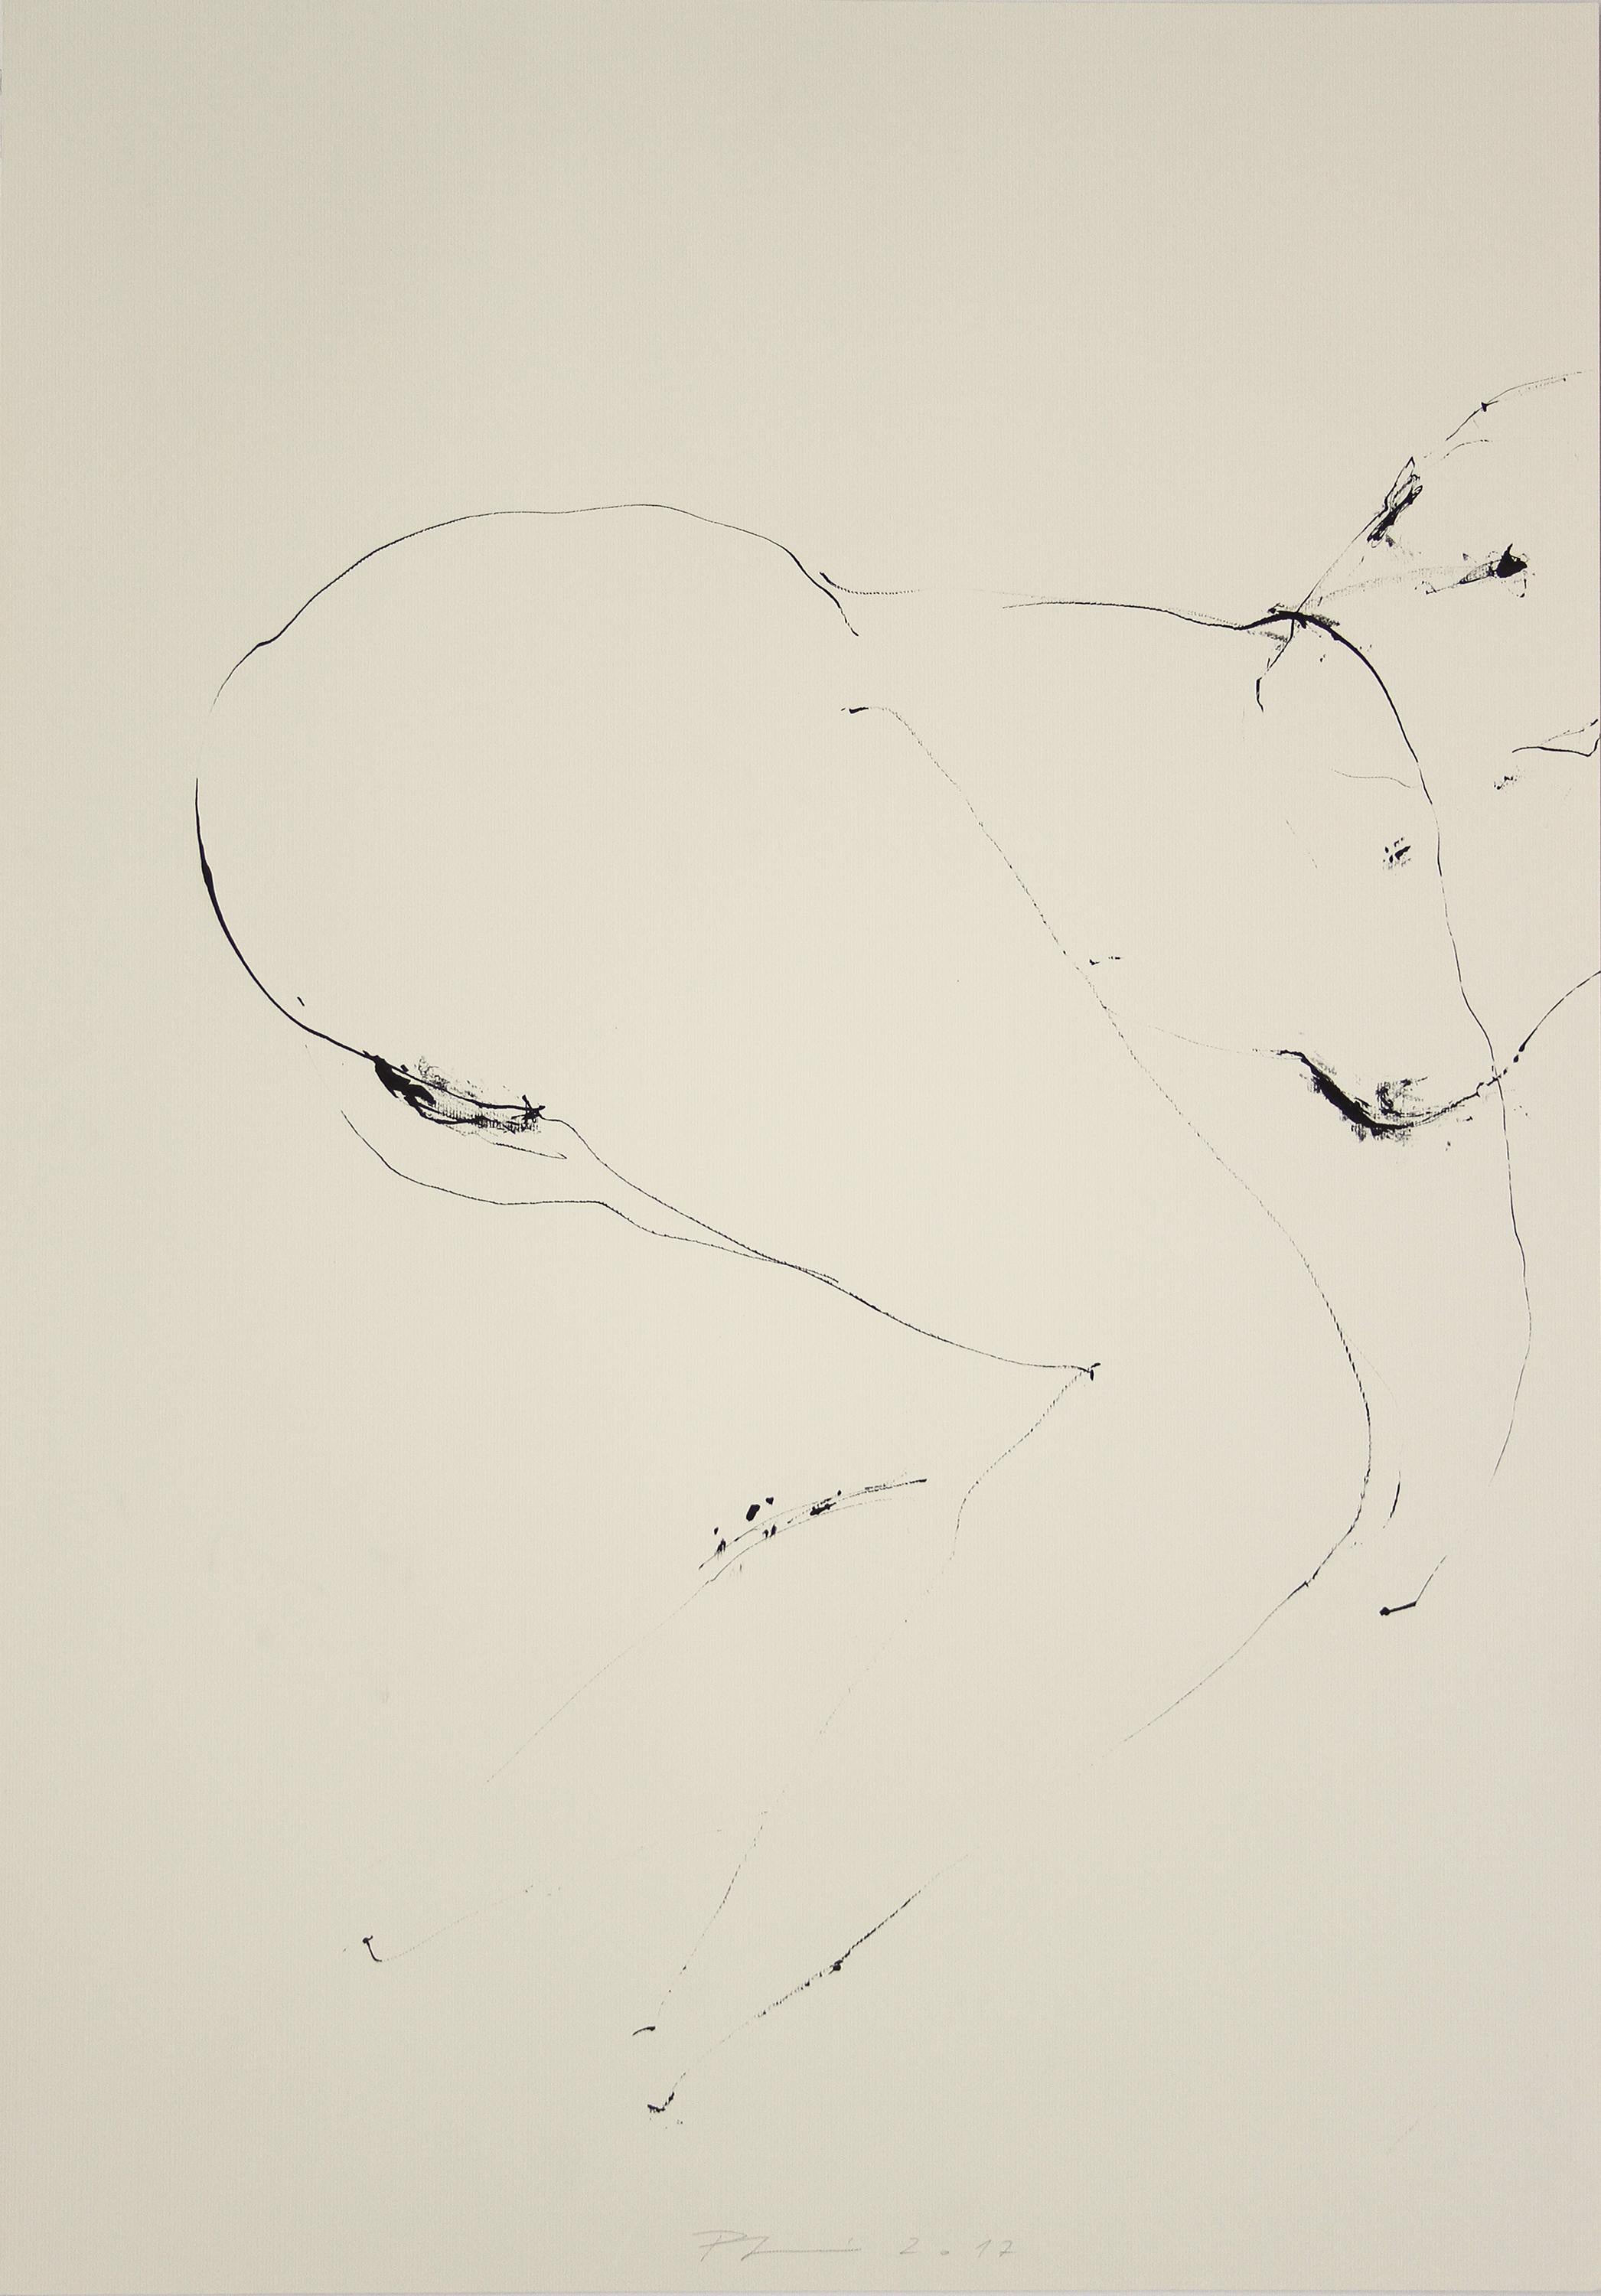 Reszegh Botond Figurative Art - Large Original line drawing 'Mirage and Damnation (Nude I)' Ink on paper Figure